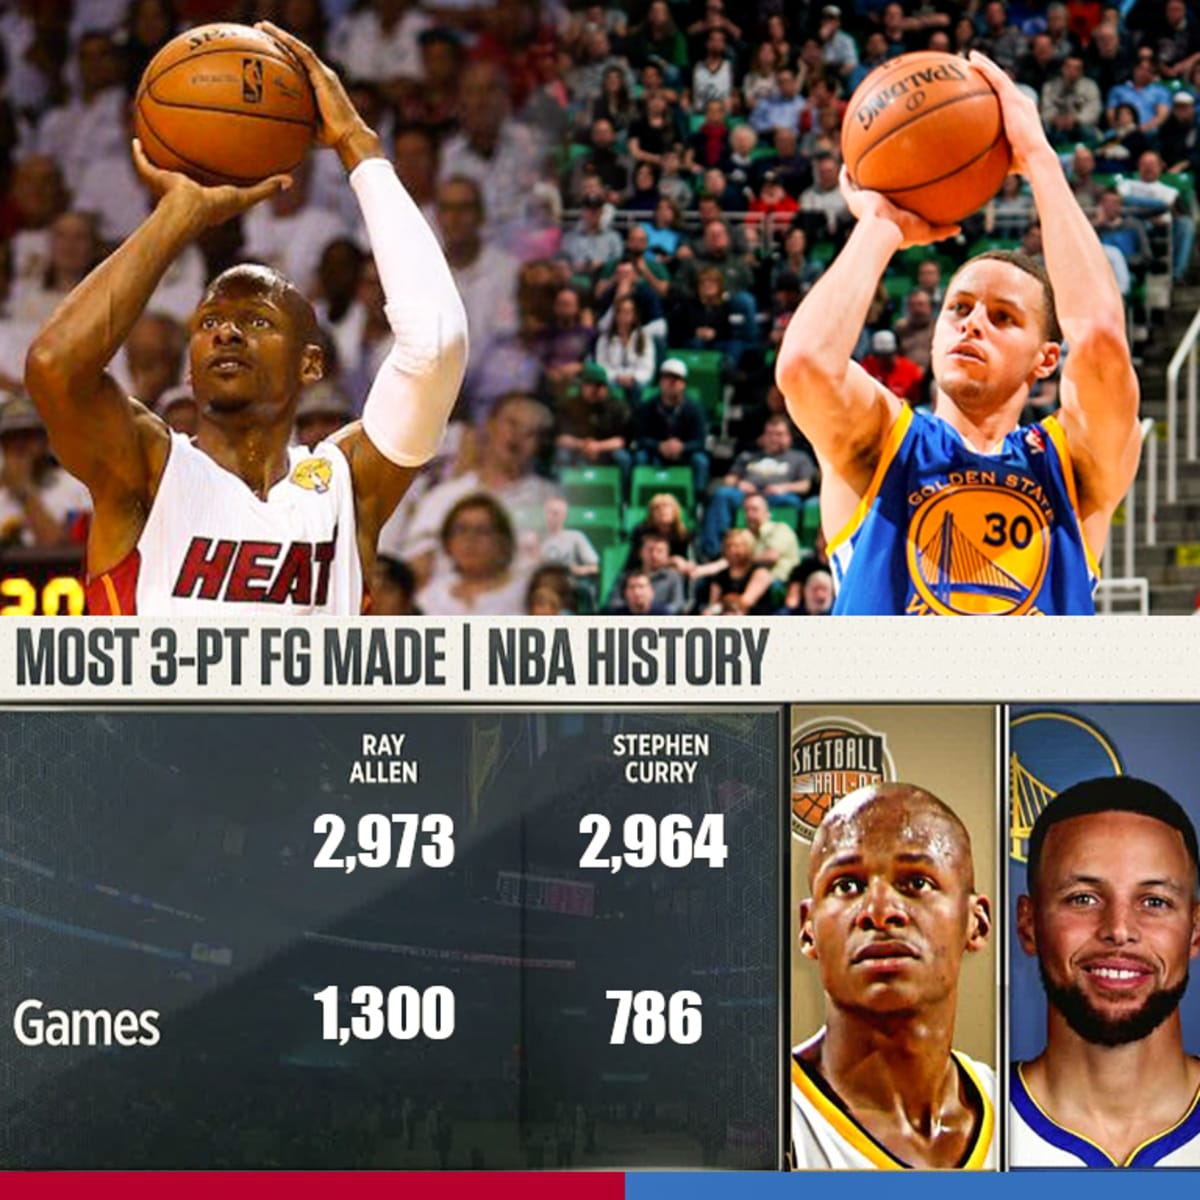 Stephen Curry Has Played Almost Half The Games As Ray Allen, But 